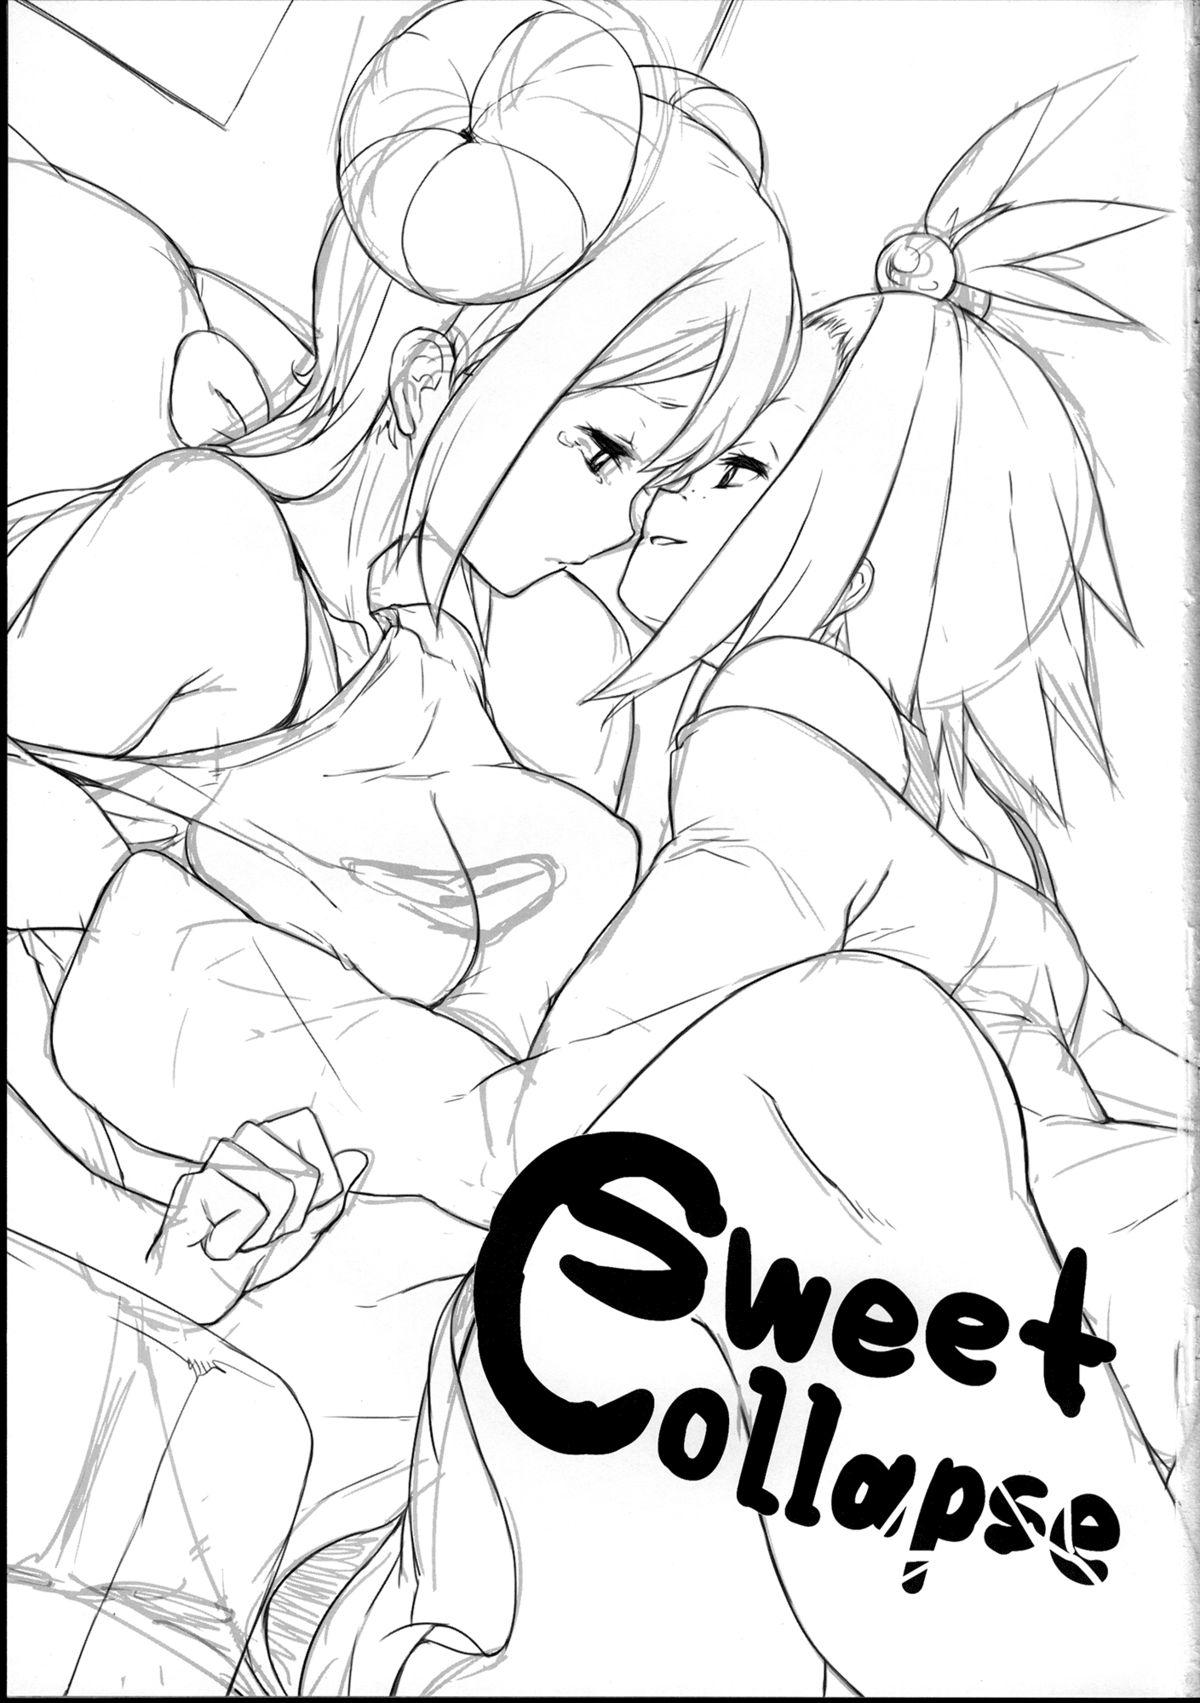 Private Sweet Collapse - Pokemon Couple Porn - Page 4